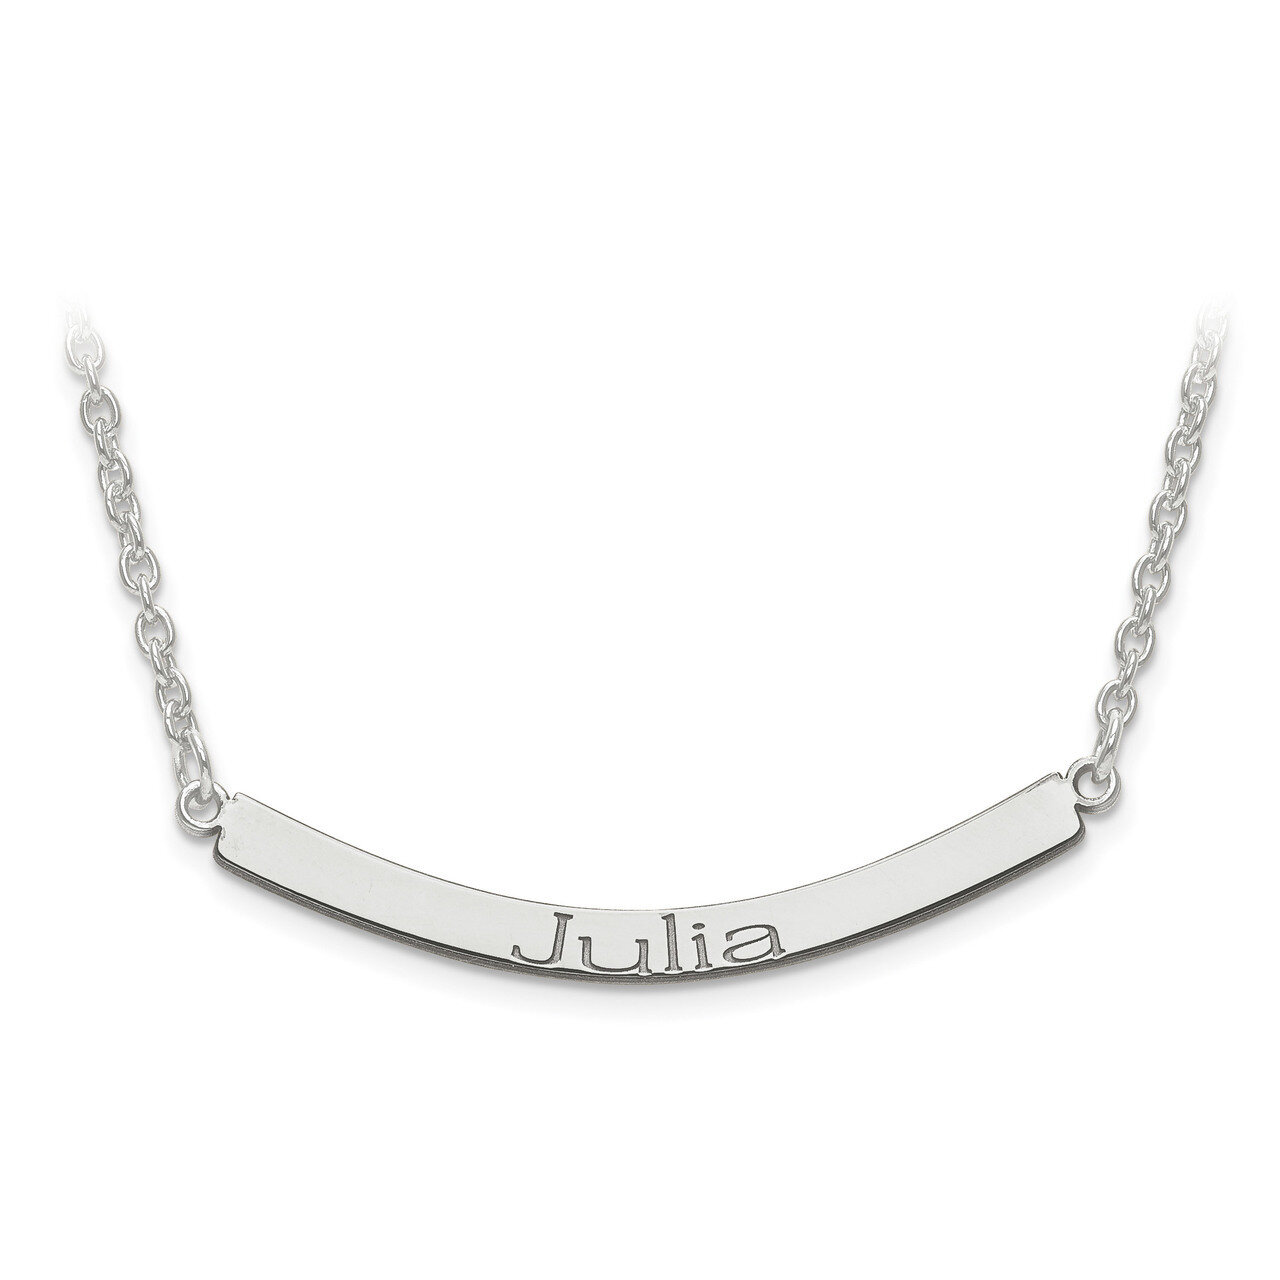 Recessed Letters Curved Name Bar with Chain 14k White Gold Polished XNA649W